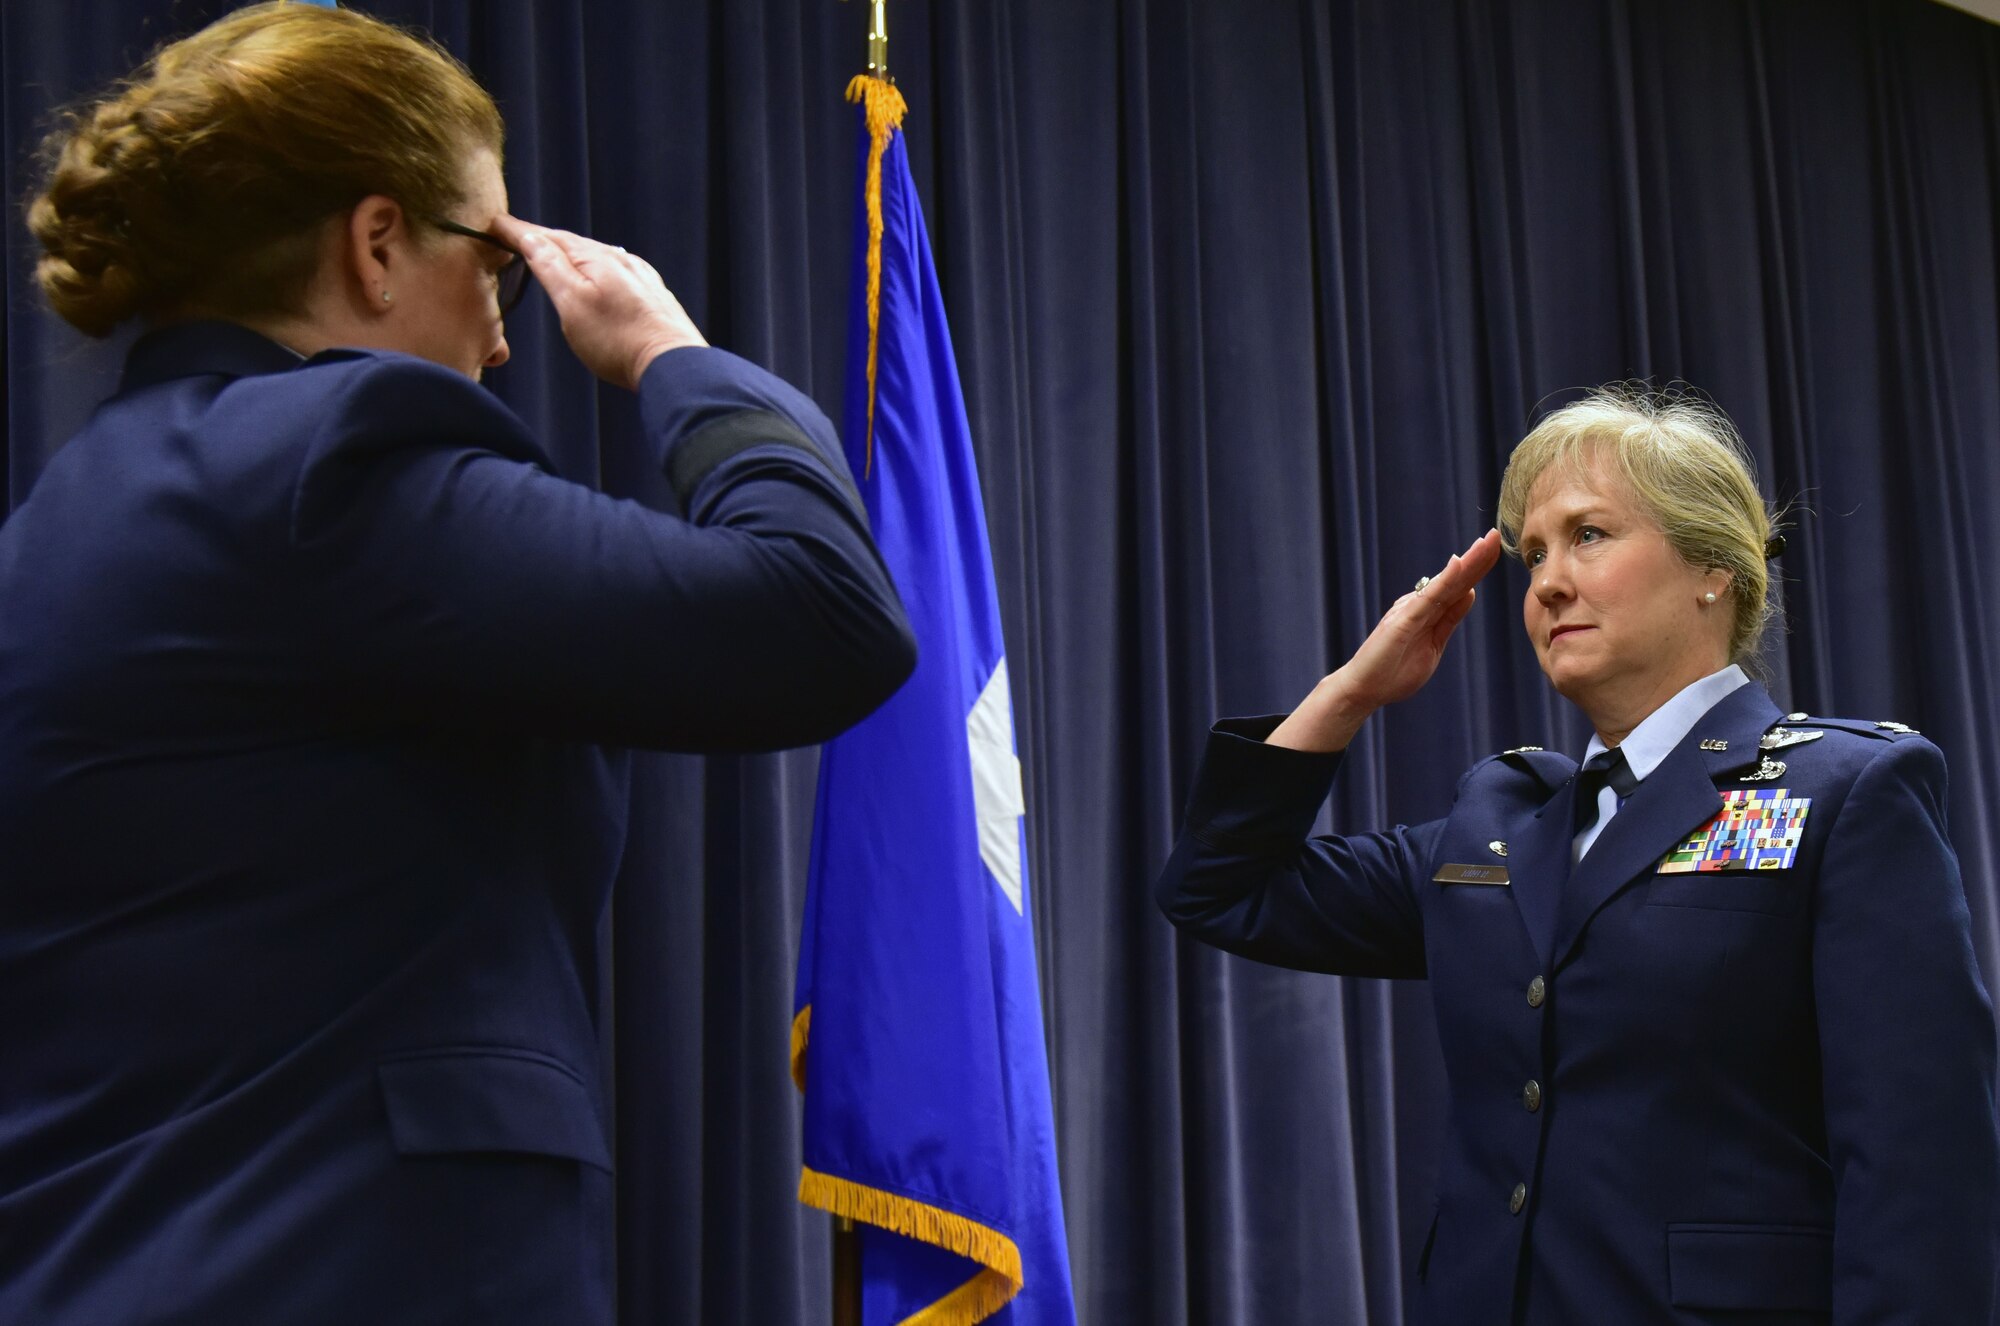 U.S. Air Force Col. Carla Riner, the new wing commander for the 166th Airlift Wing, salutes Assistant Adjutant General for the Delaware Air National Guard Brig. Gen. Wendy Wenke after assuming command April 6, 2019 at the Delaware Air National Guard Base, Del. Riner's previous assignment was with the West Virginia National Guard, and is the first female wing commander for the 166th AW. (U.S. Air Force Photo by Staff Sgt. Nathan Bright)